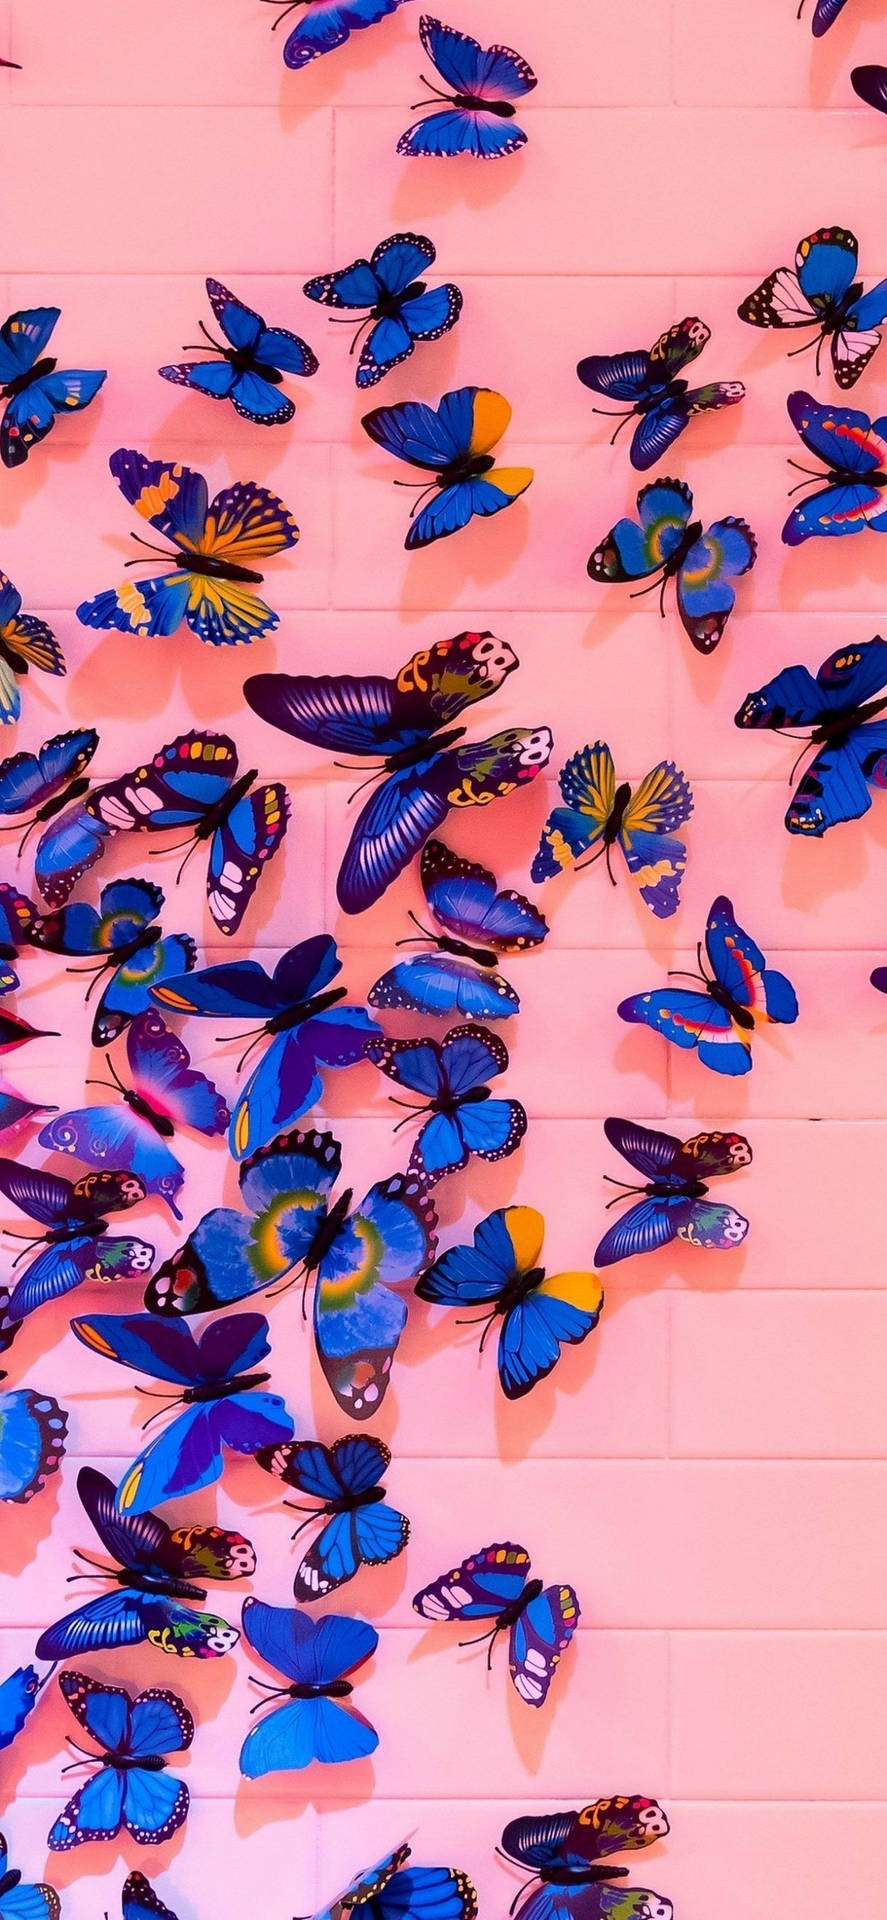 Butterflies On Pink Wall Background